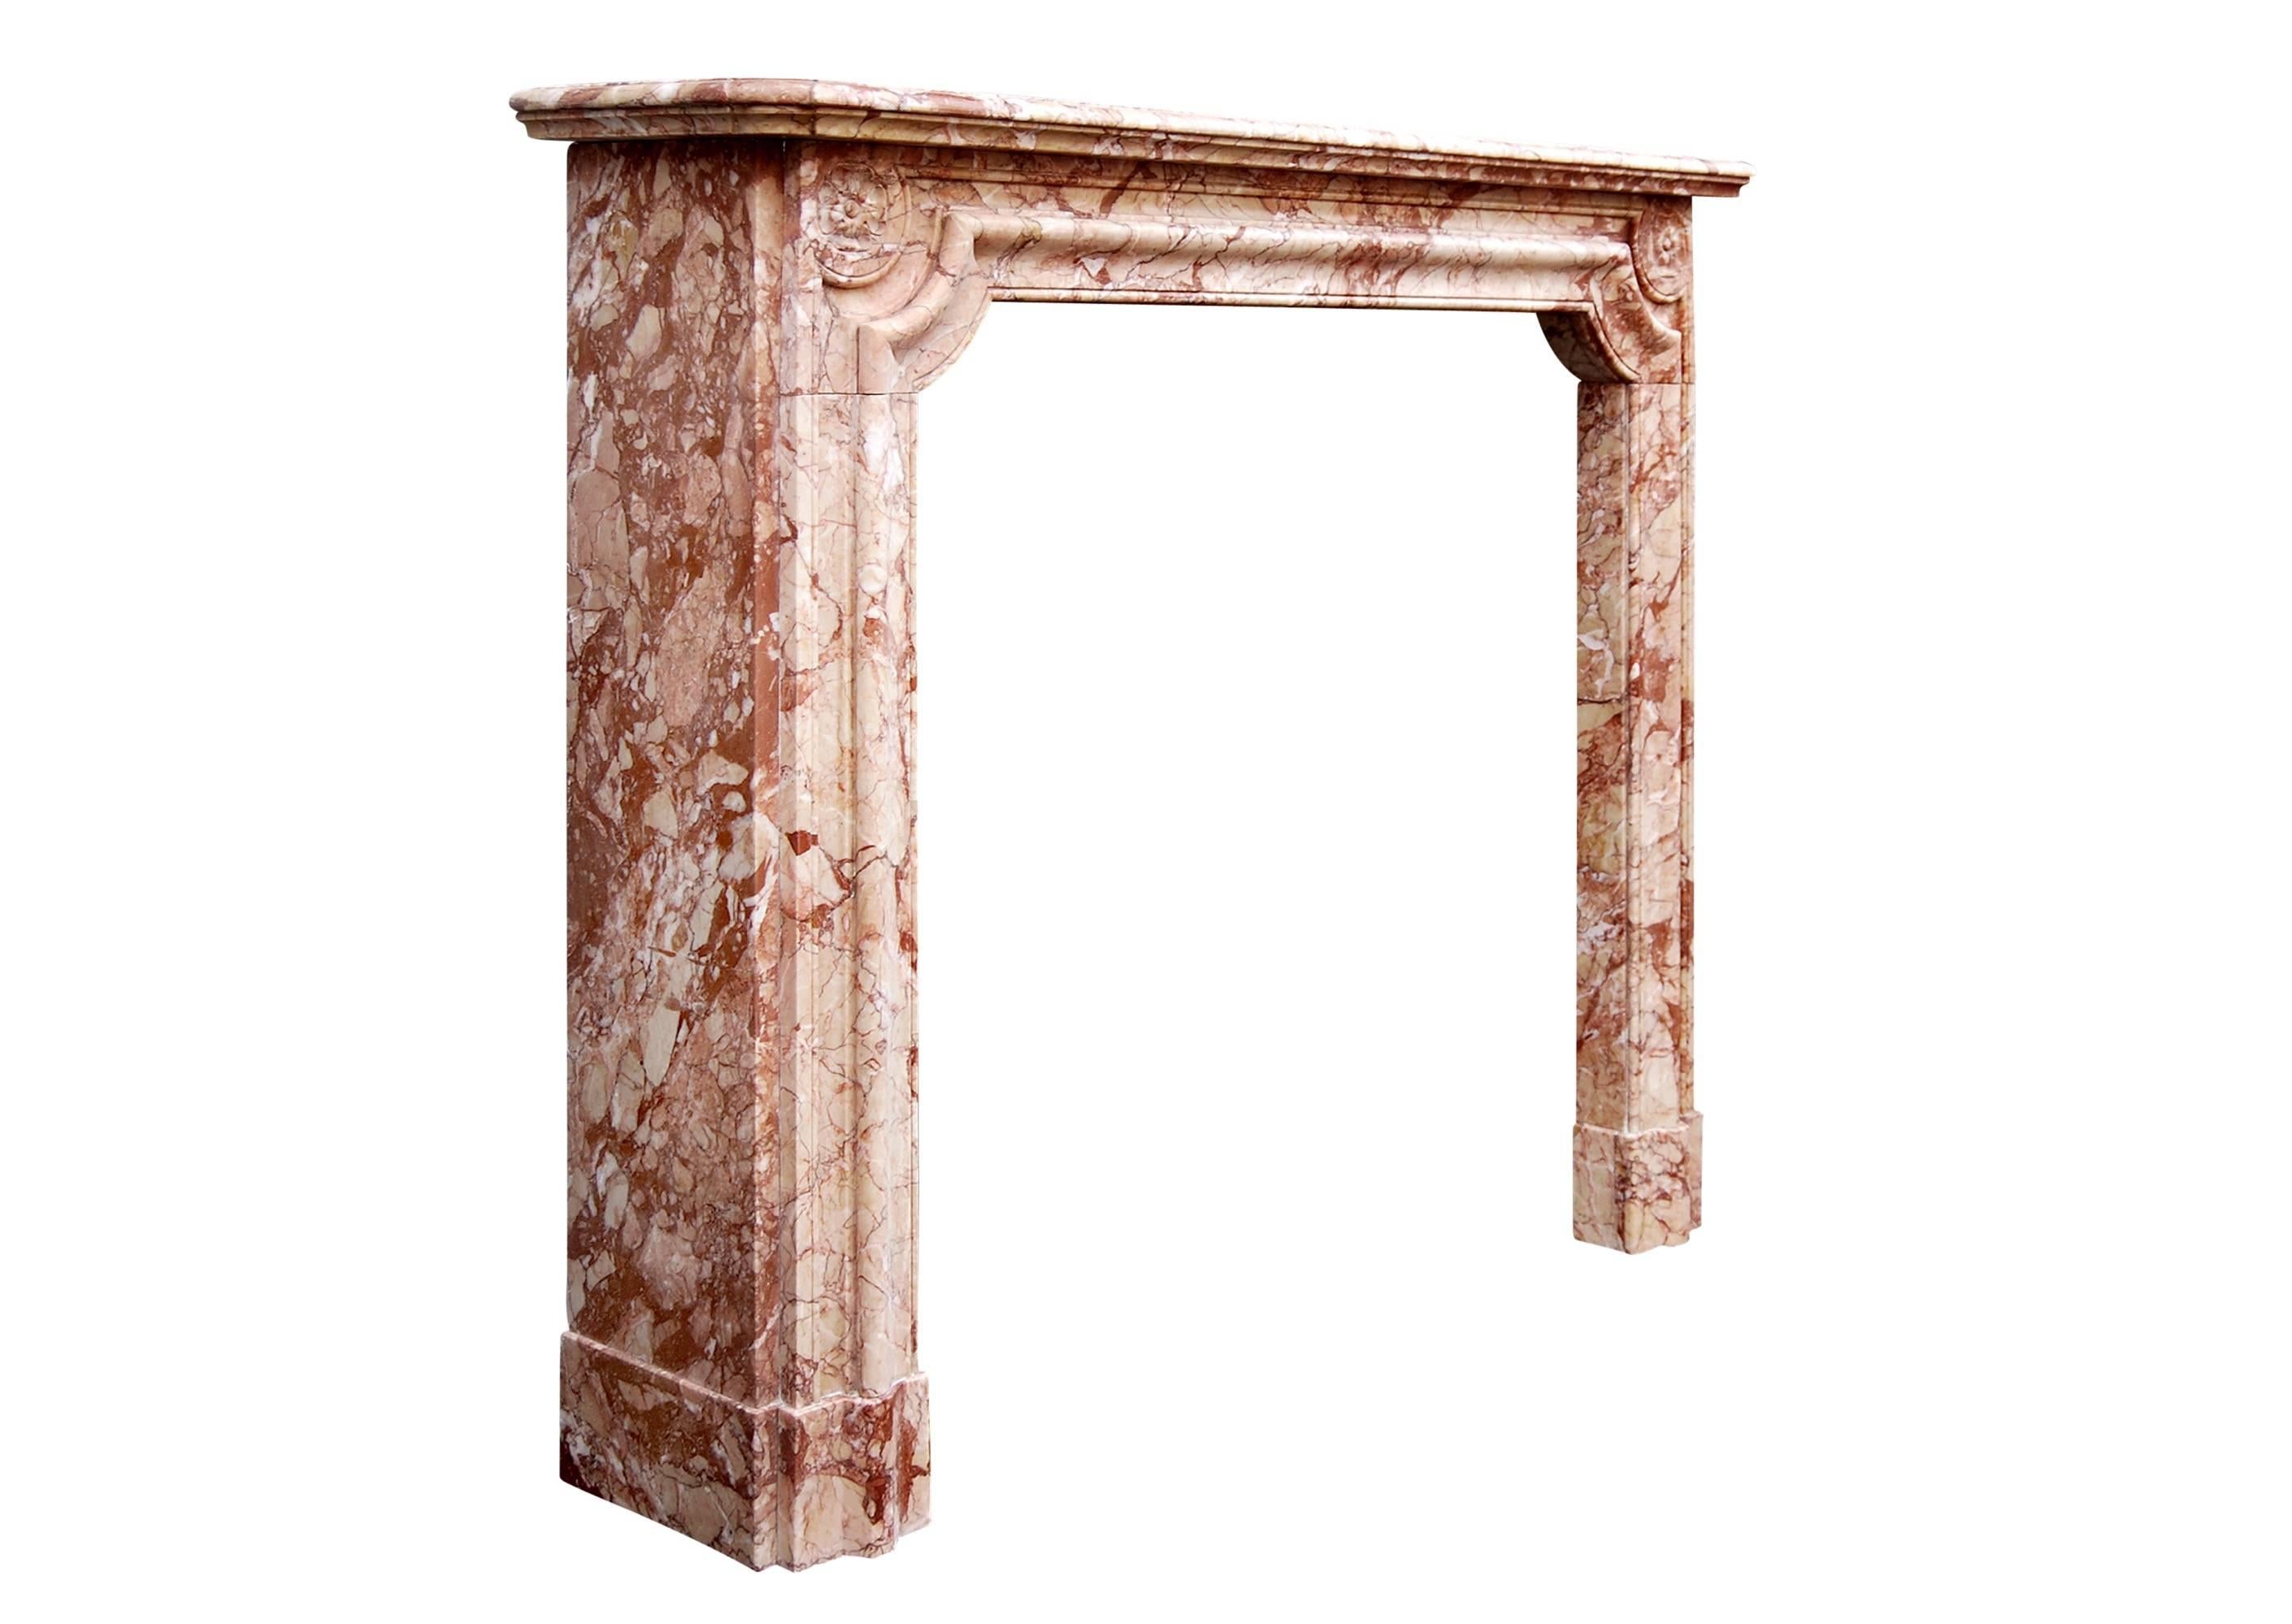 A 19th century French Napoleon III (circa 1870) Breccia Pernice marble fireplace. The moulded frieze and jambs and carved round pateraes to end.

Measures: Shelf width 1314 mm 51 ¾ in
Overall height 1092 mm 43 in
Opening height 940 mm 37